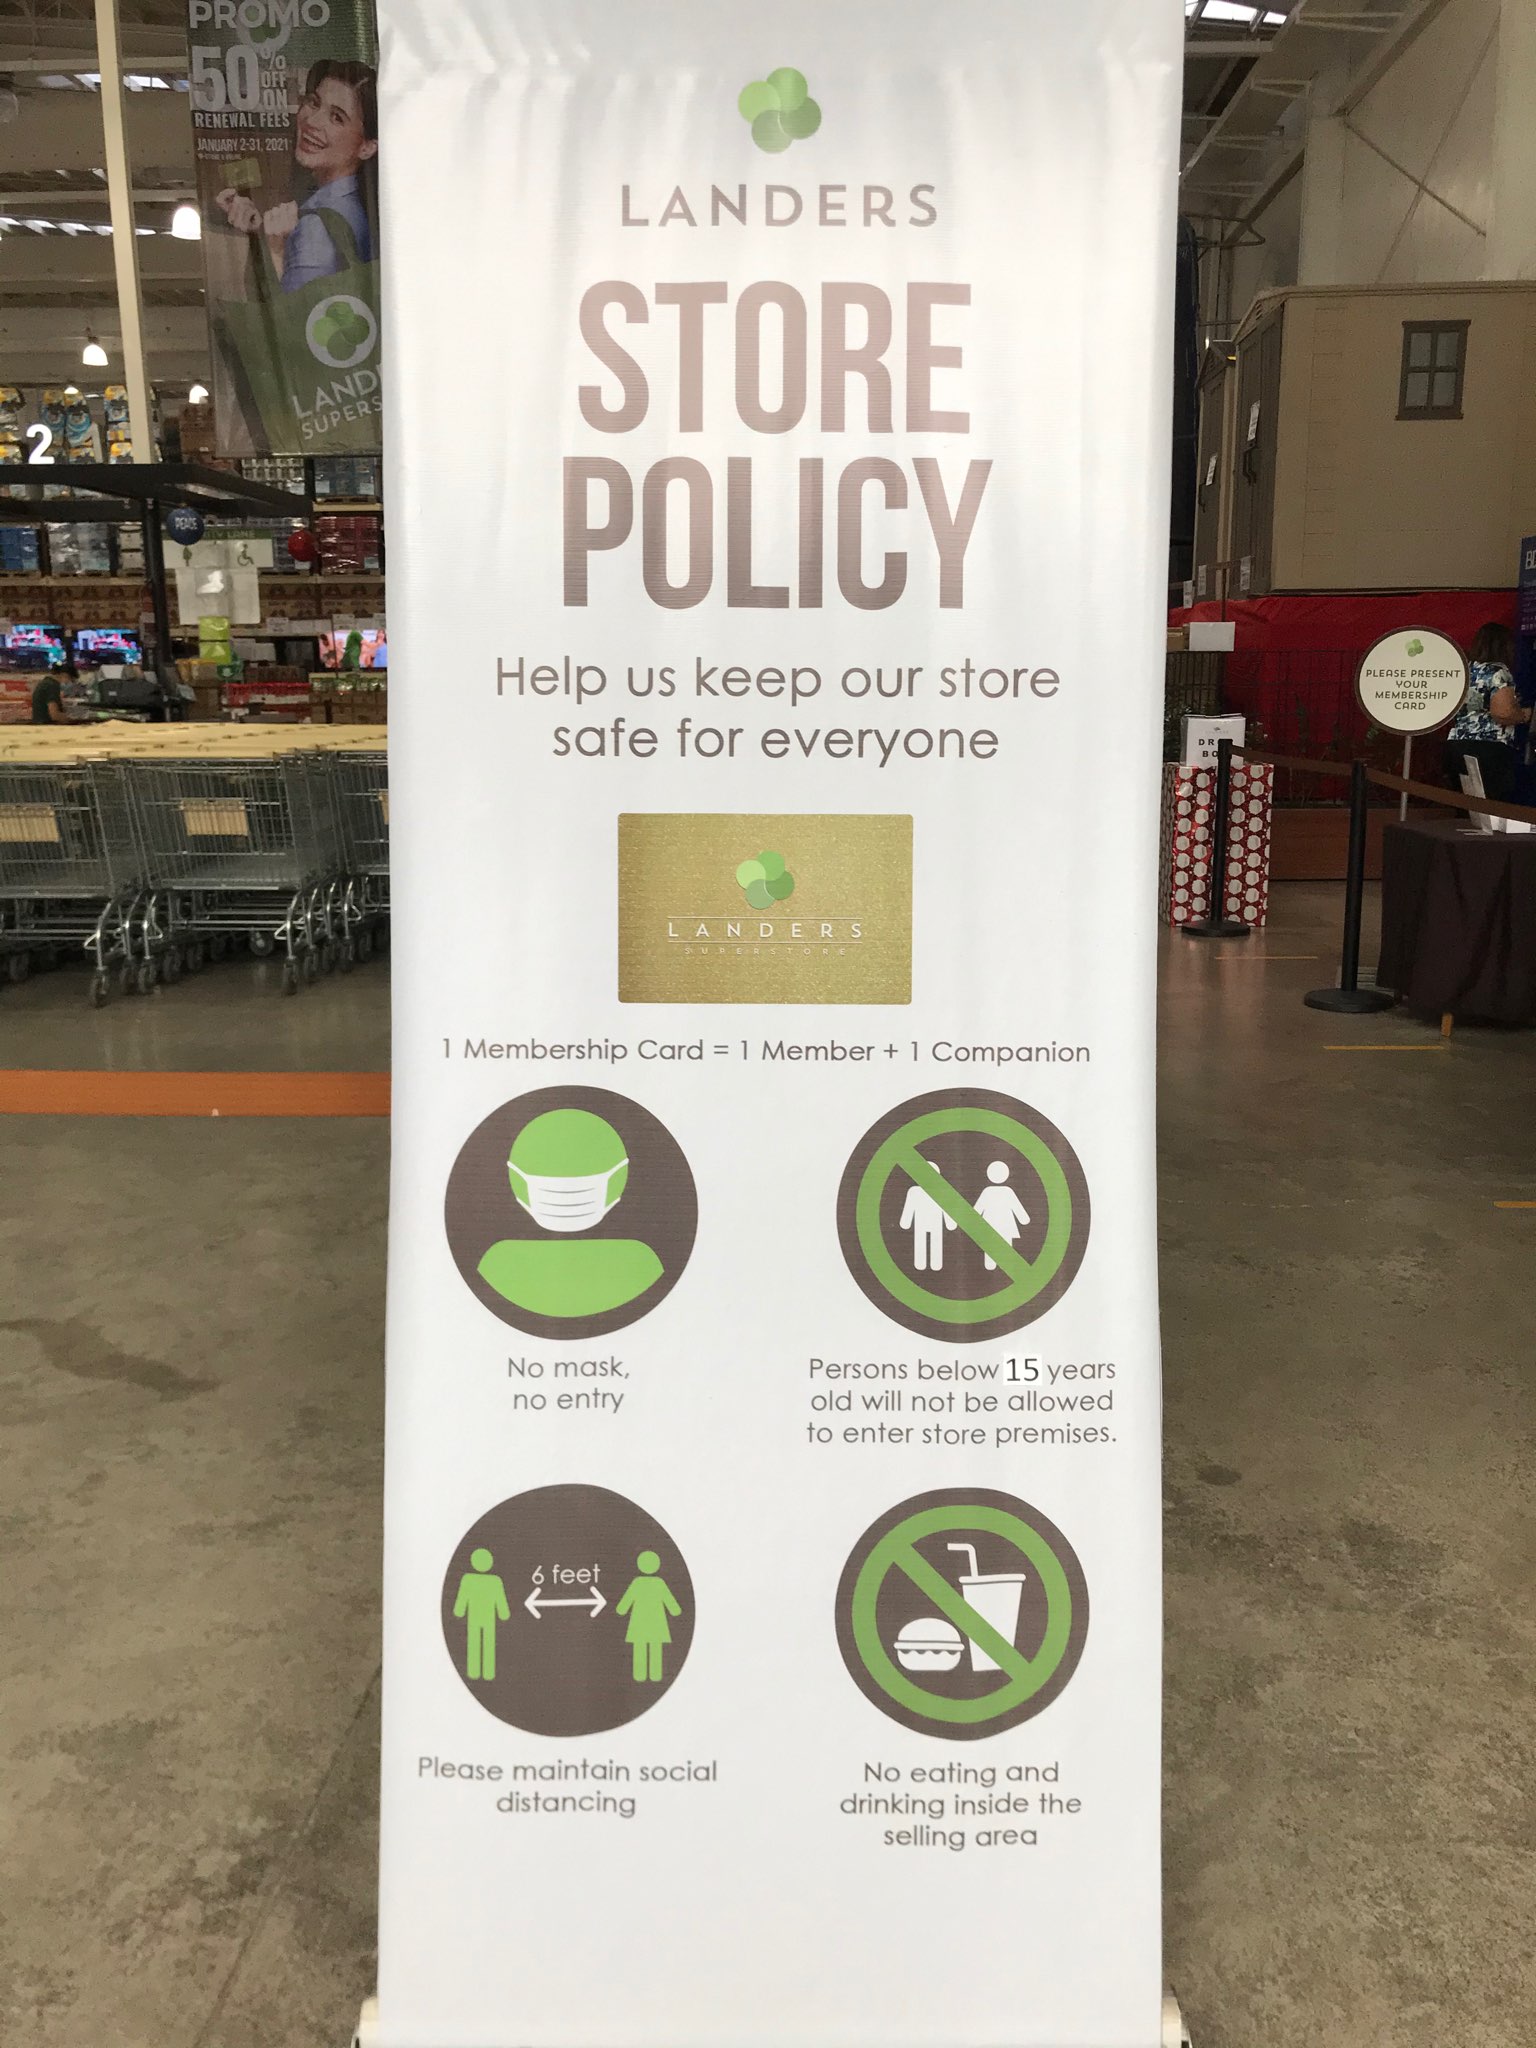 In Landers Superstore, every member can only bring 1 guest per visit (compared before, when each member can bring up to 4 guests).